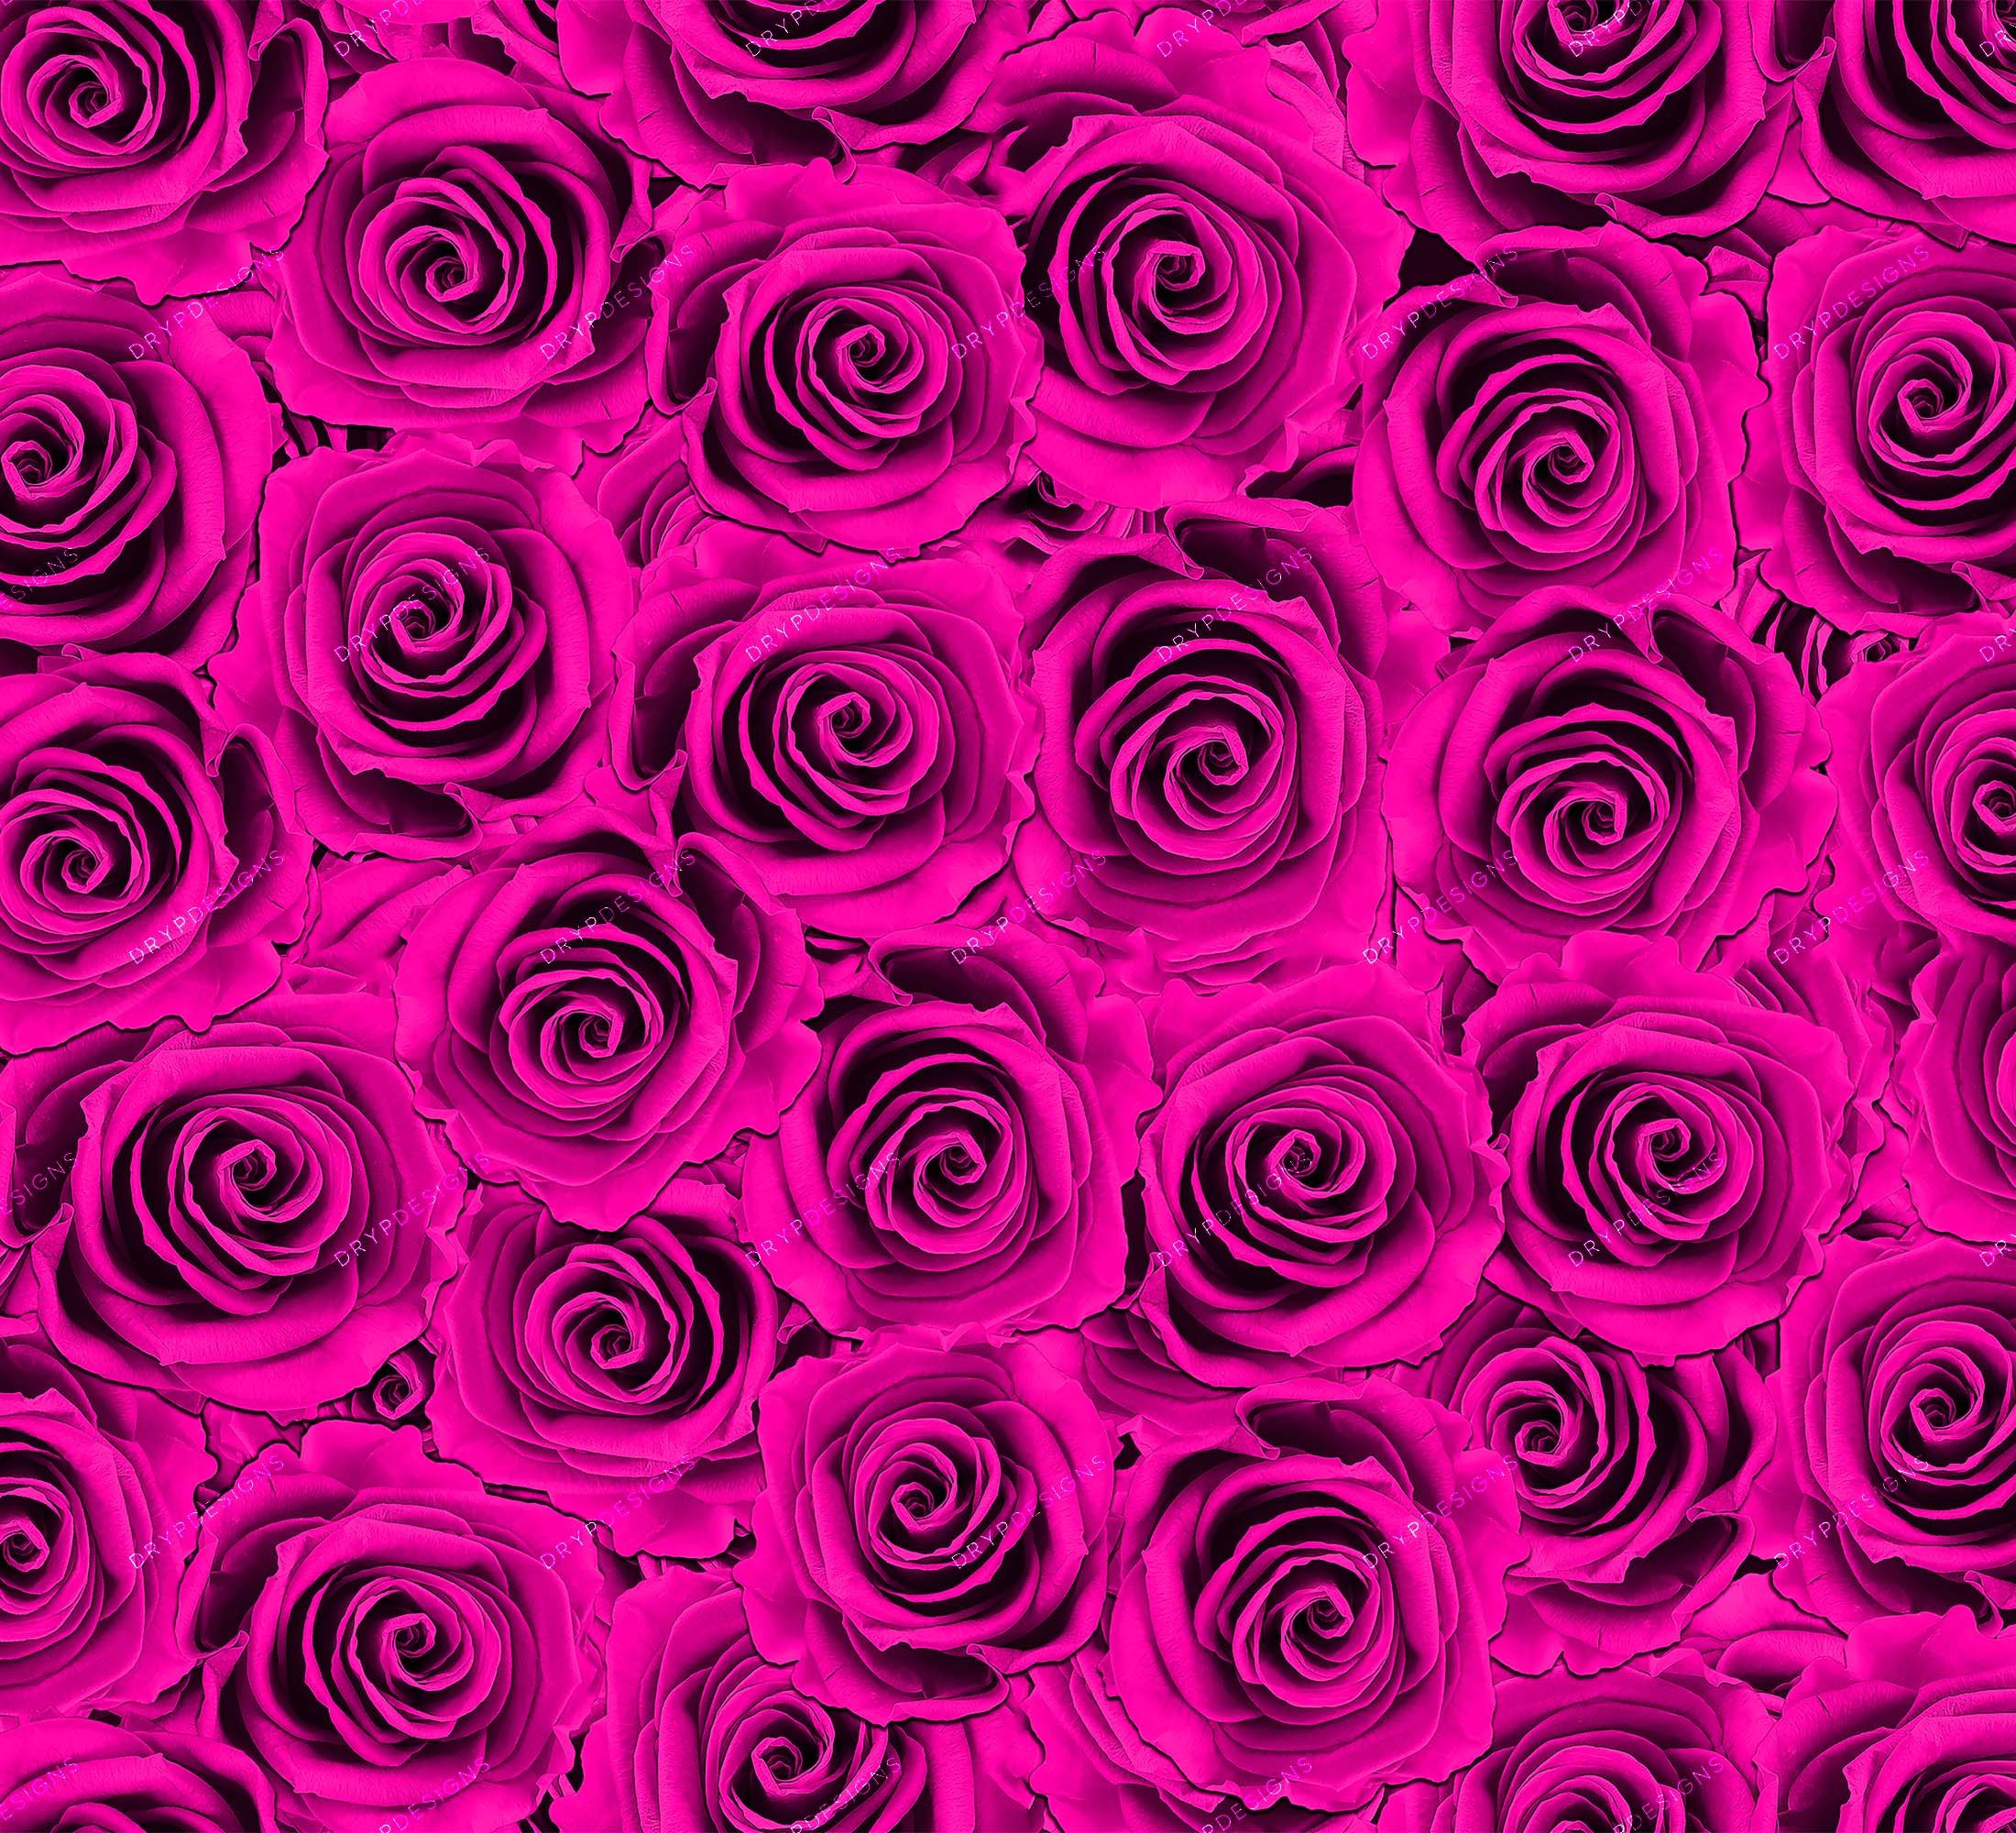 Pink Floral Roses Pictures, Photos, and Images for Facebook, Tumblr,  Pinterest, and Twitter